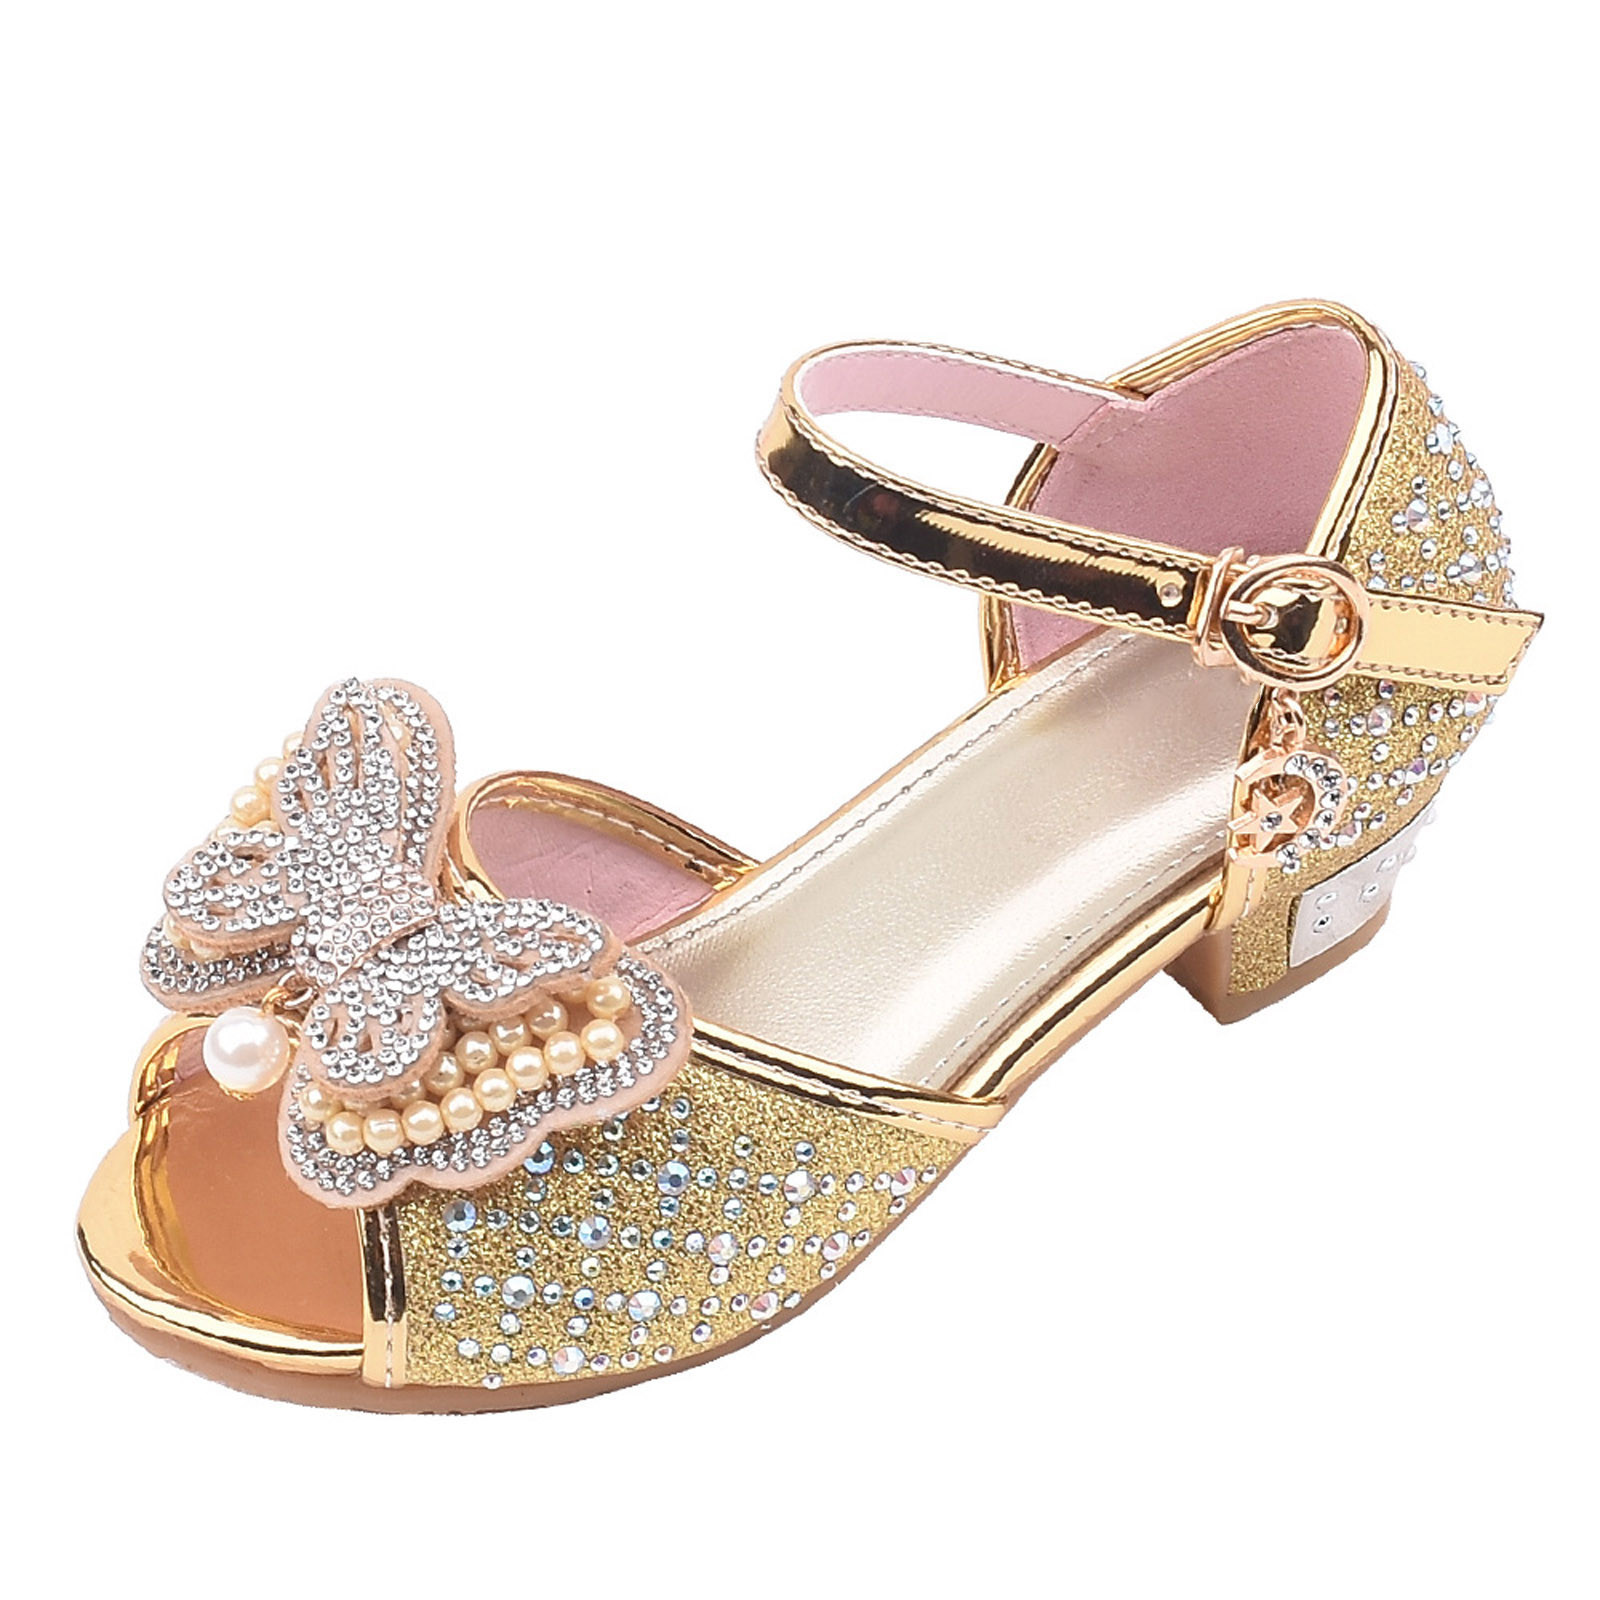 Penkiiy Children's Shoes Girls Fish Mouth Butterfly Pearl Rhinestone Crystal Princess Shoes Dance Shoes Cool Sandals for Kids 5-5.5 Years Gold 2023 Summer Deal - image 1 of 7